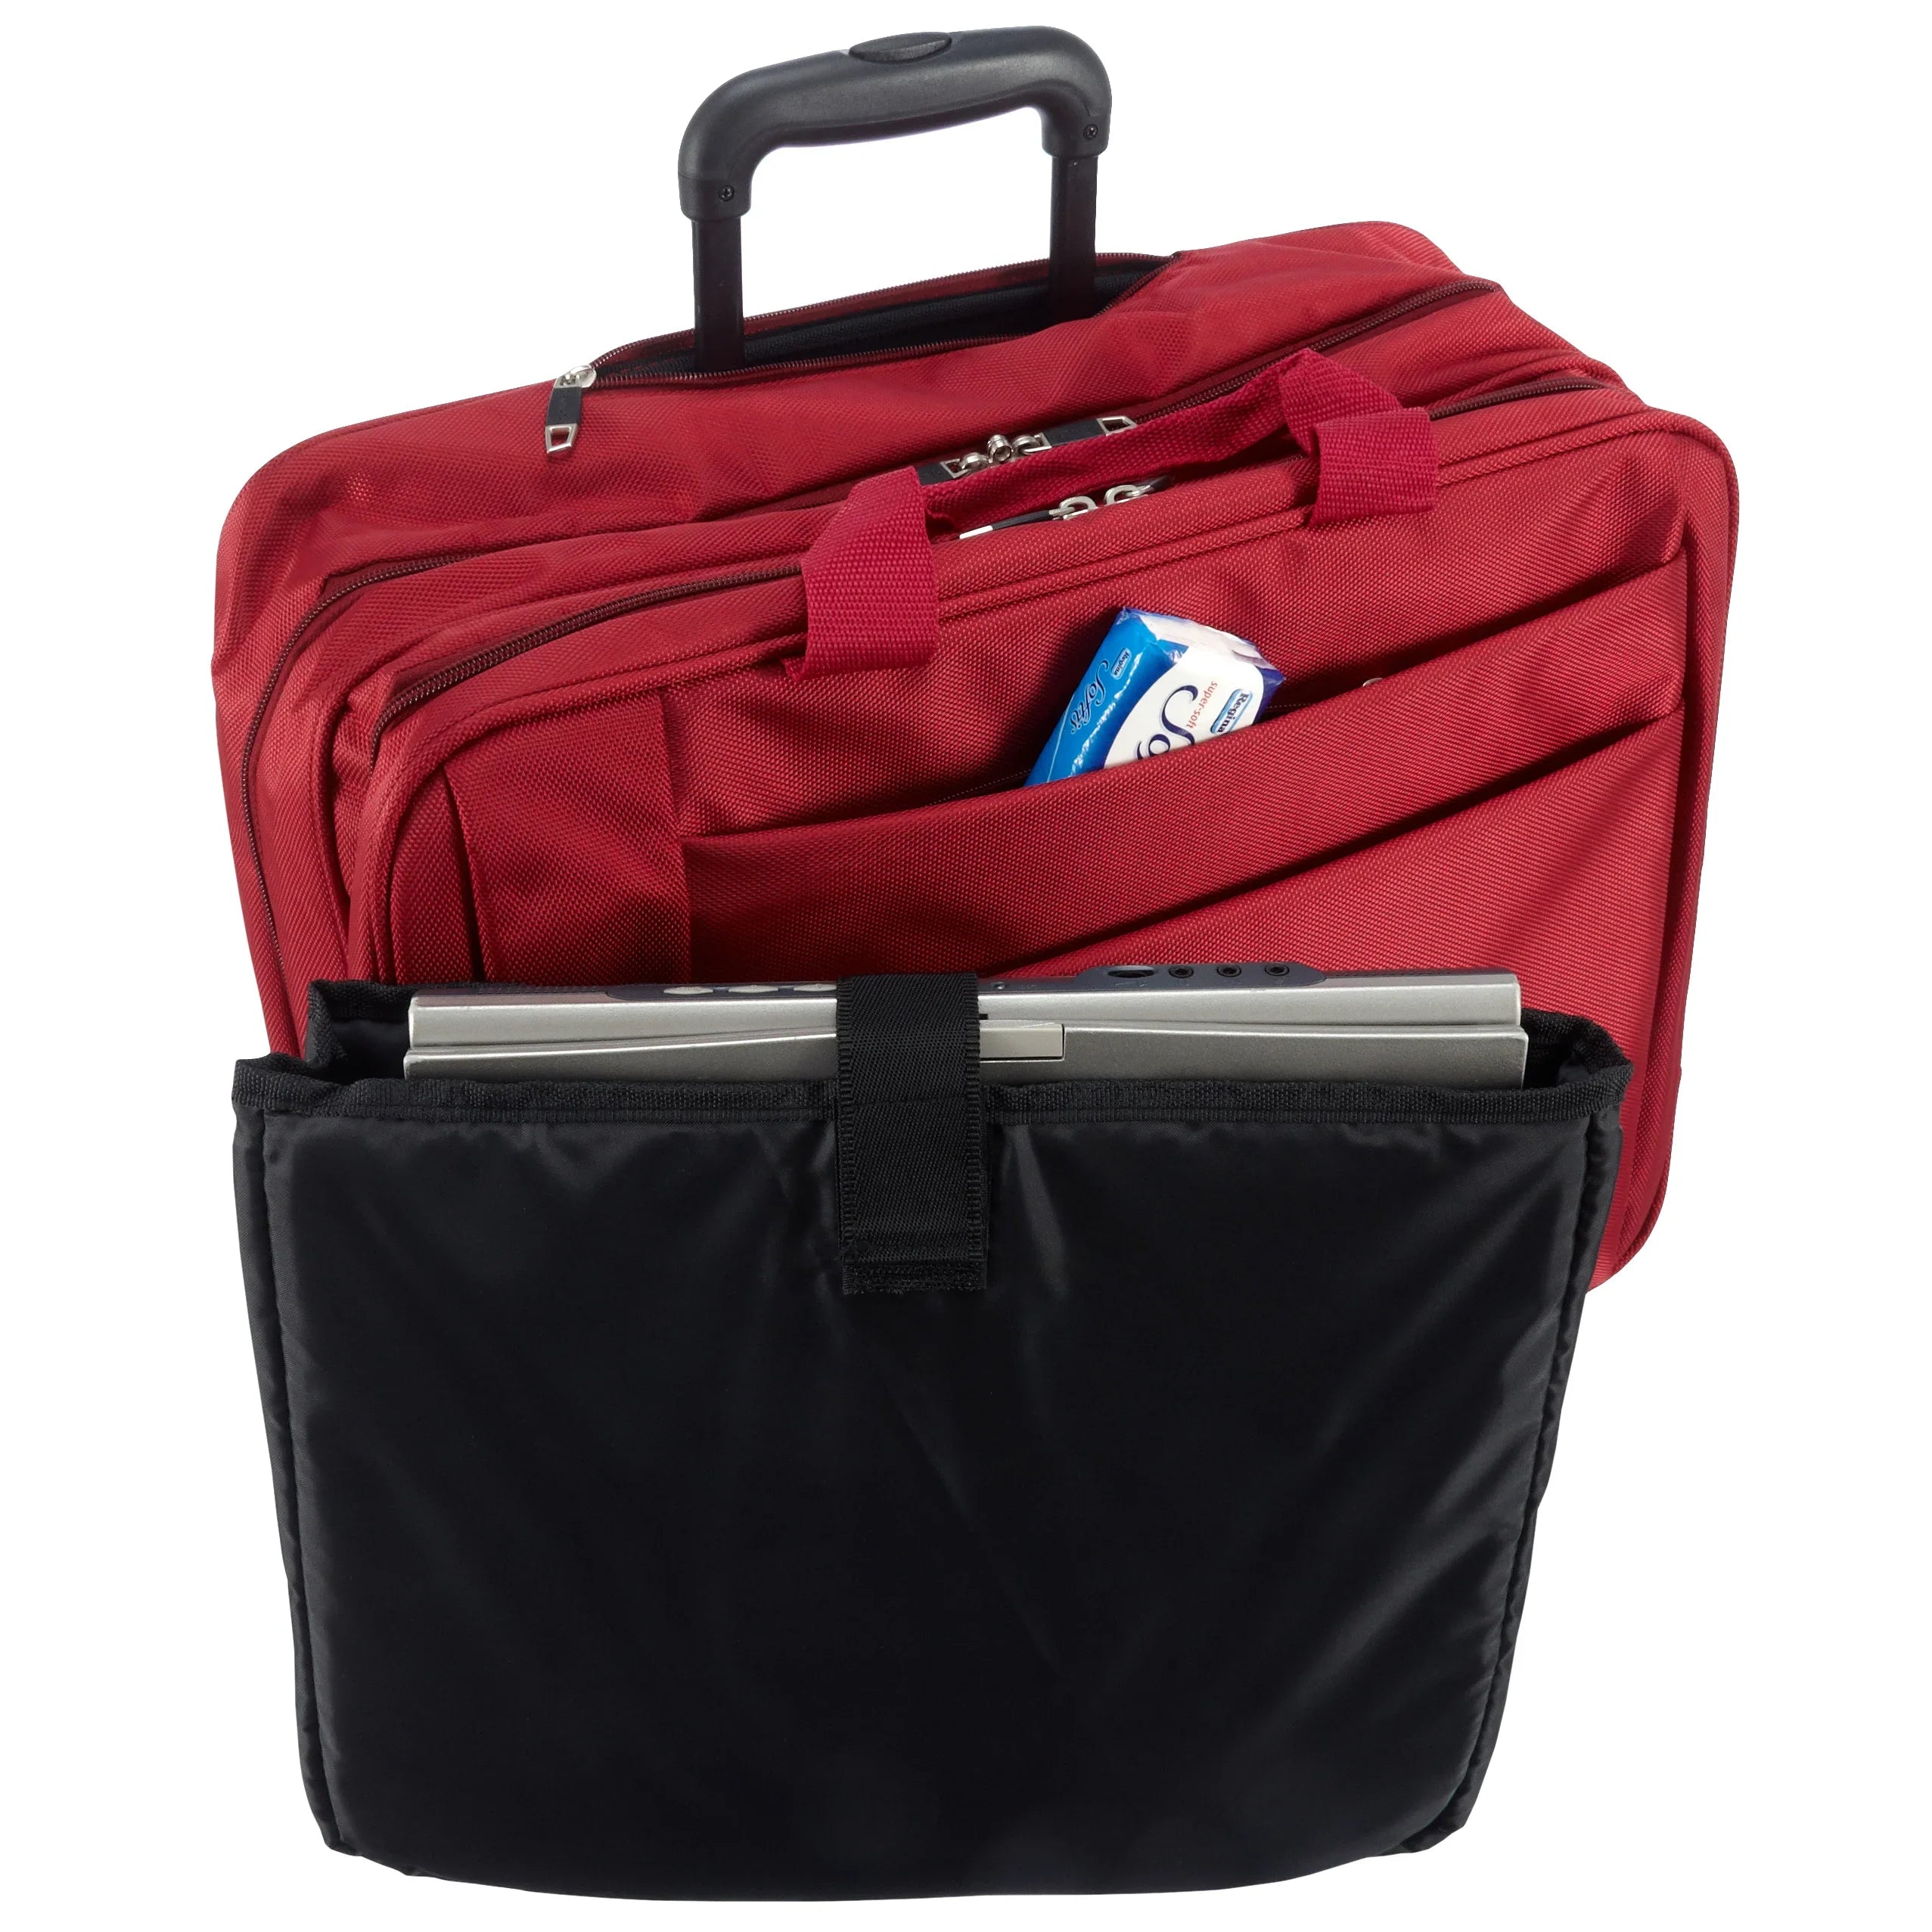 Dermata Business Mobile Office 44 cm - rot